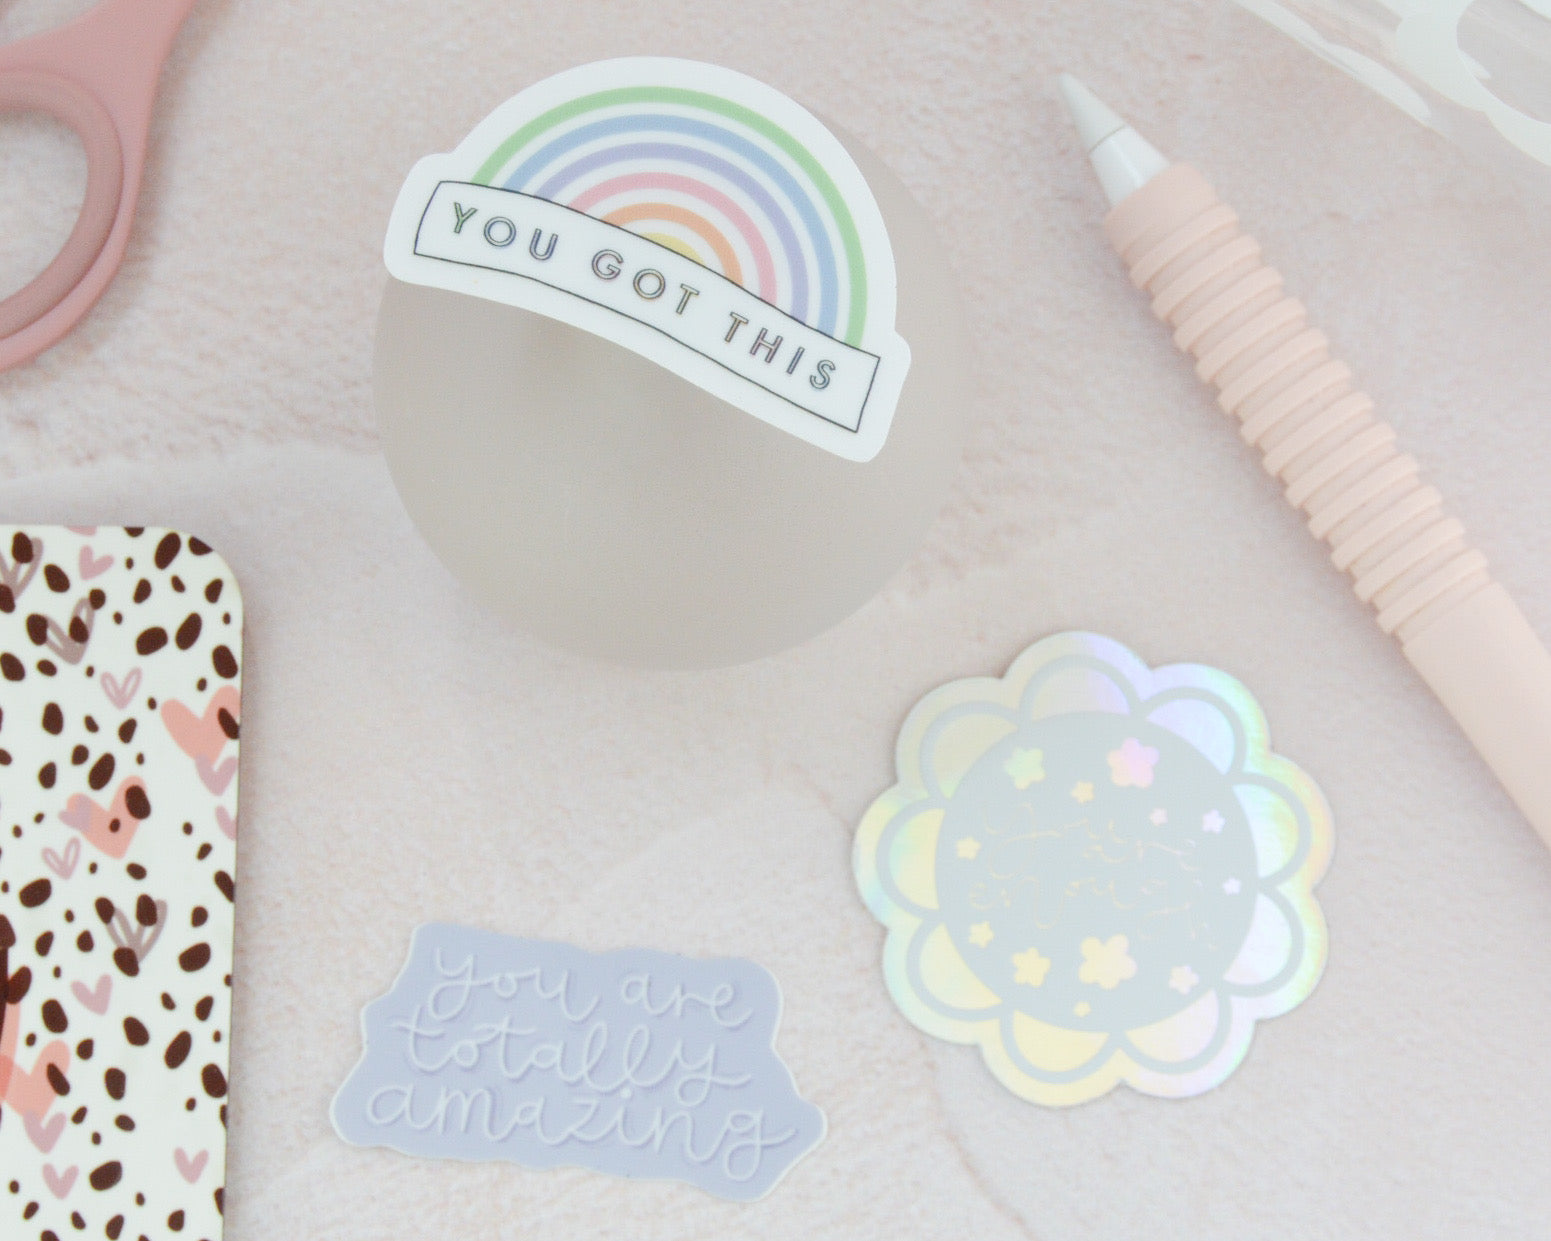 You Got This Clear Rainbow Sticker